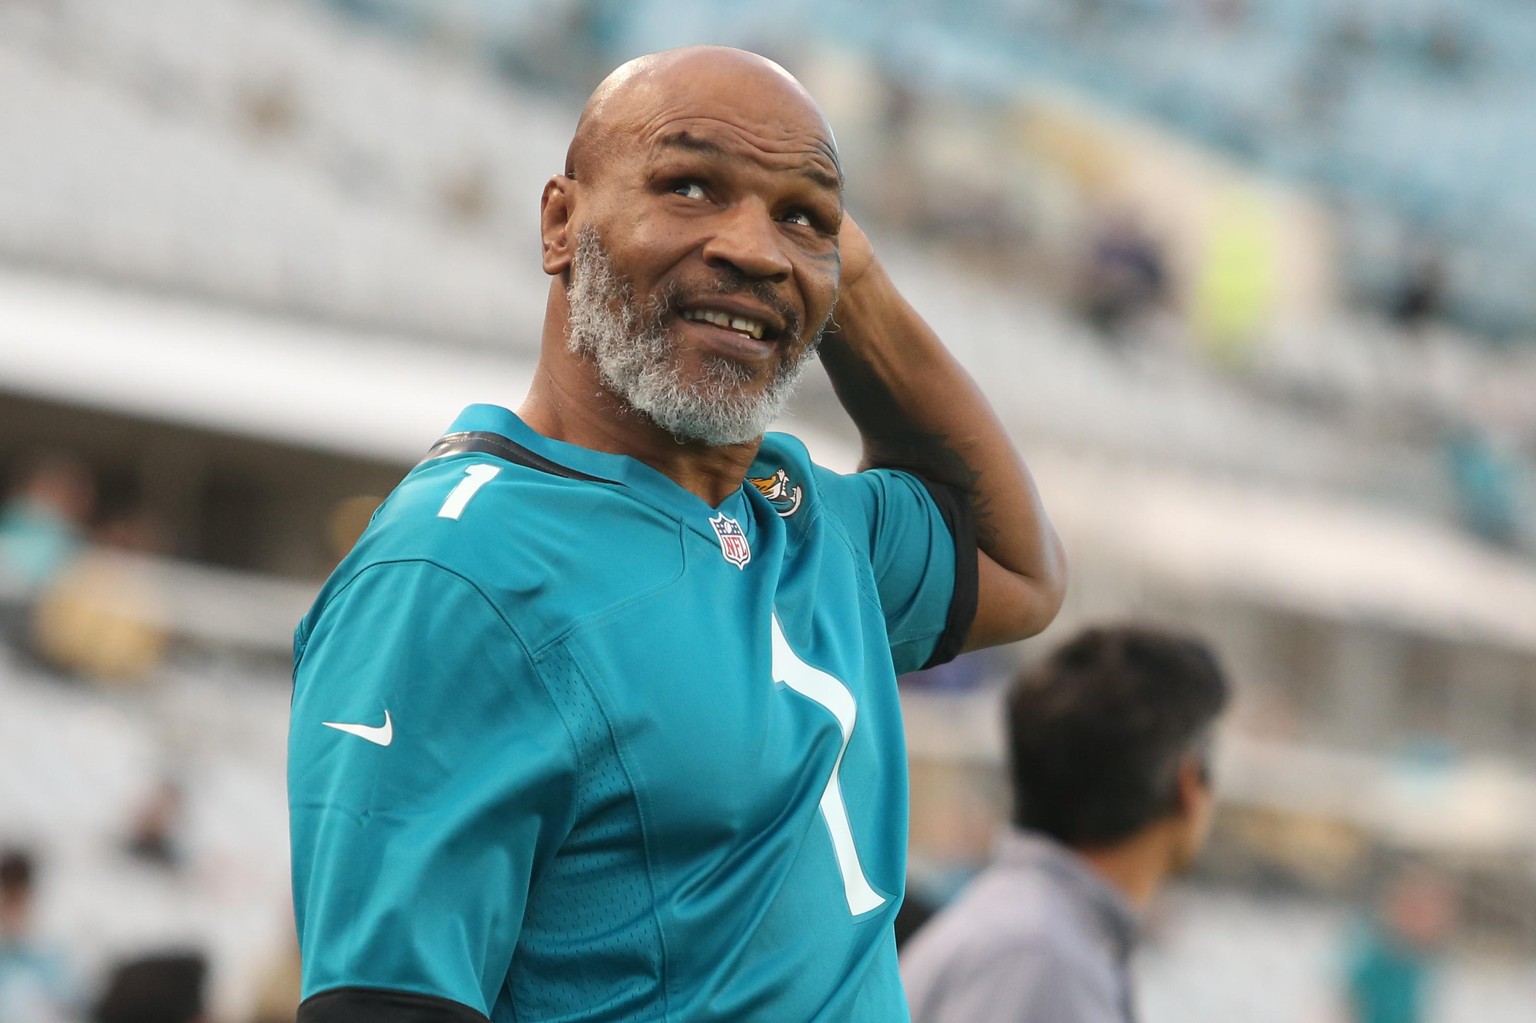 JACKSONVILLE, FL - SEPTEMBER 19: Former boxing champion Mike Tyson looks on during the game between the Tennessee Titans and the Jacksonville Jaguars on September 19, 2019 at TIAA Bank Field in Jackso ...